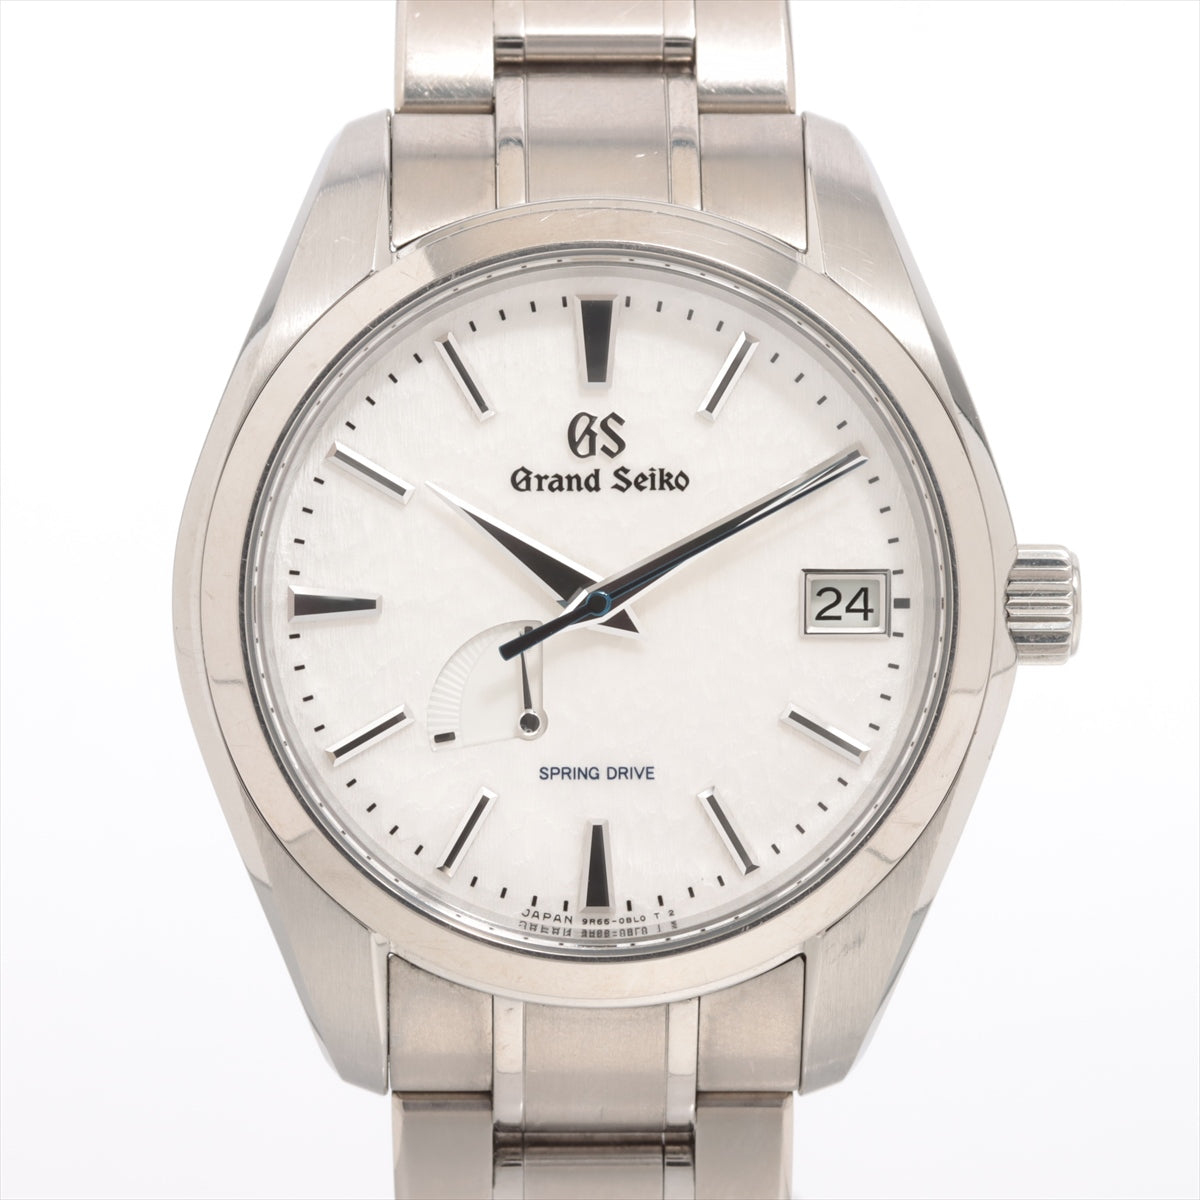 Grand Seiko Heritage Collection 9R65-0AE0 TI AT White Dial 1 Extra Link